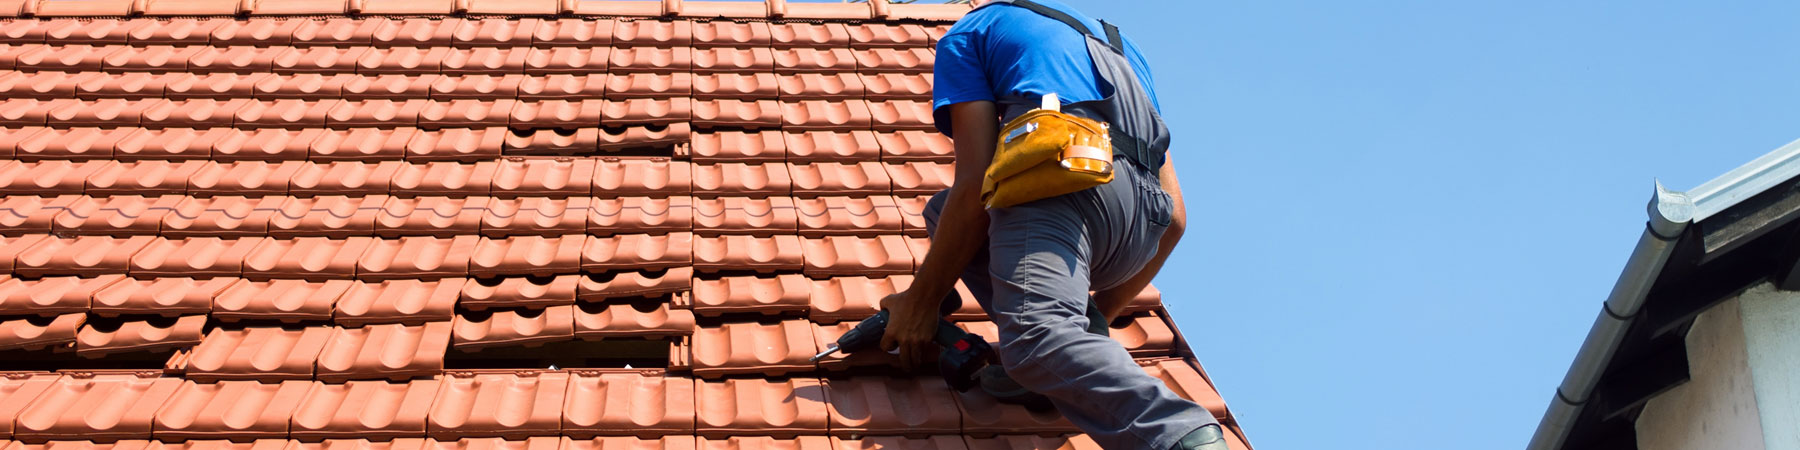 Image showing person working on roof